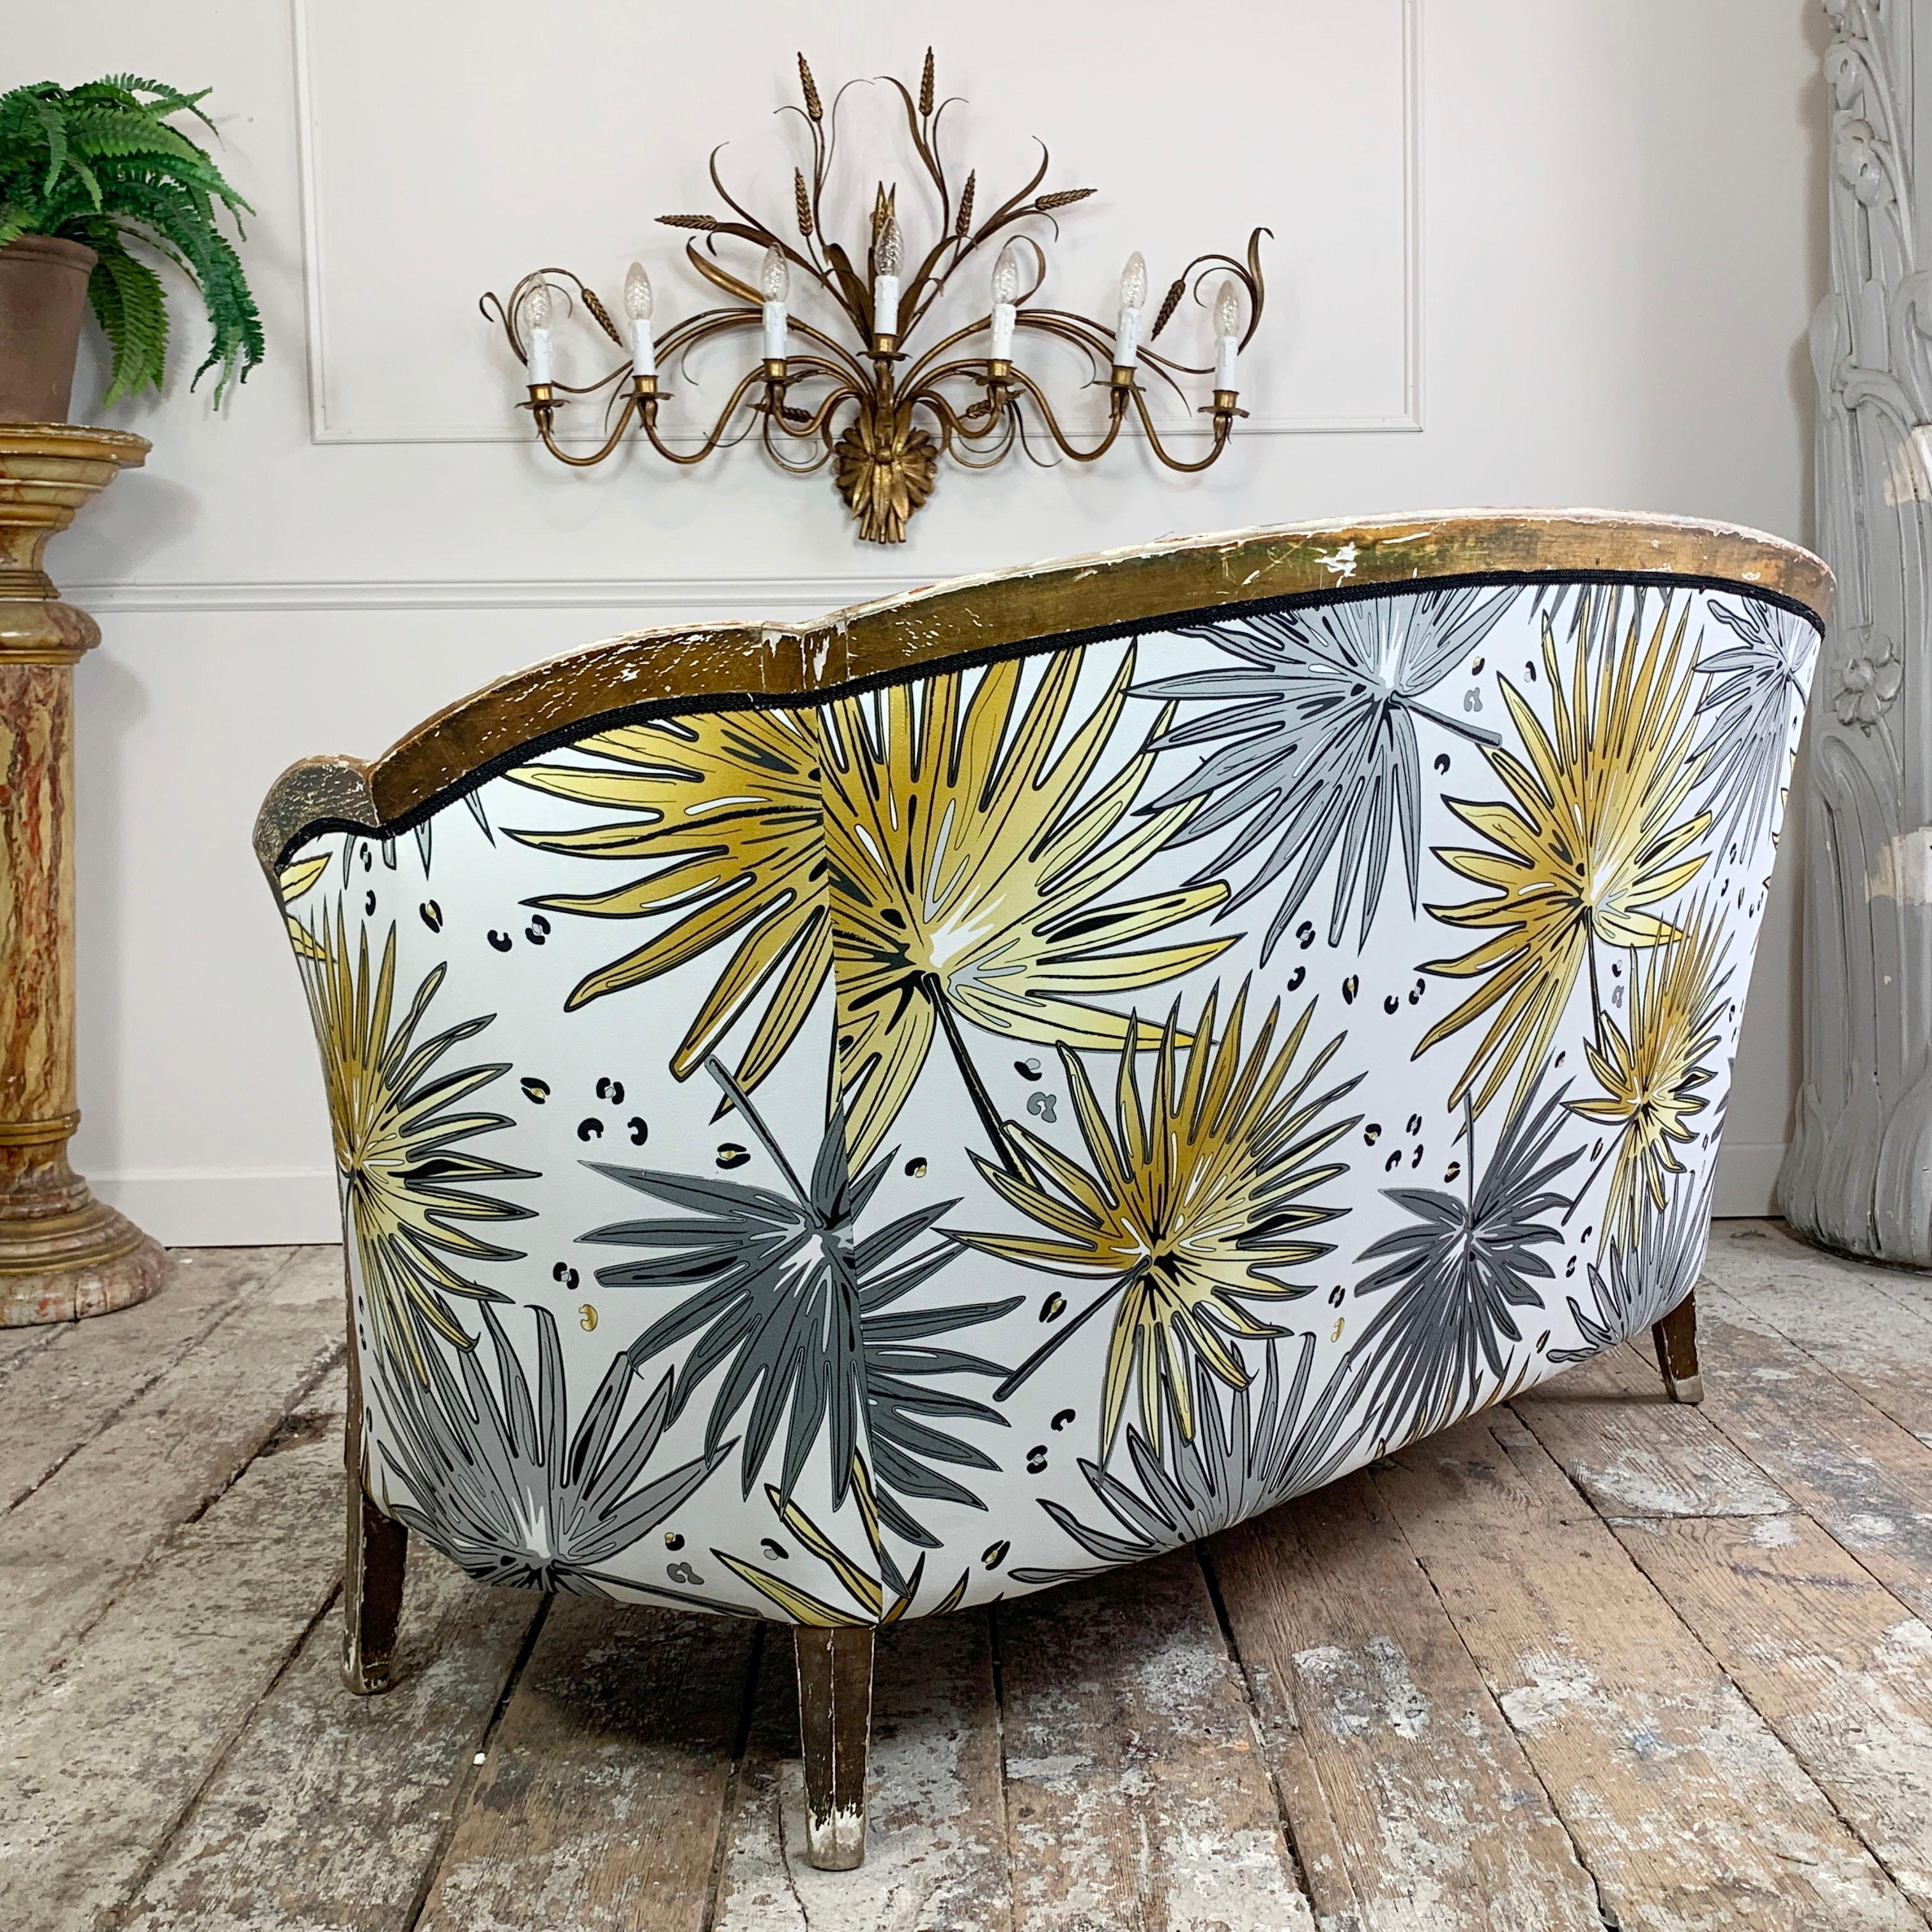 Cotton Antique French Parlour Settee in Tropics 'Fan Palm' Fabric For Sale